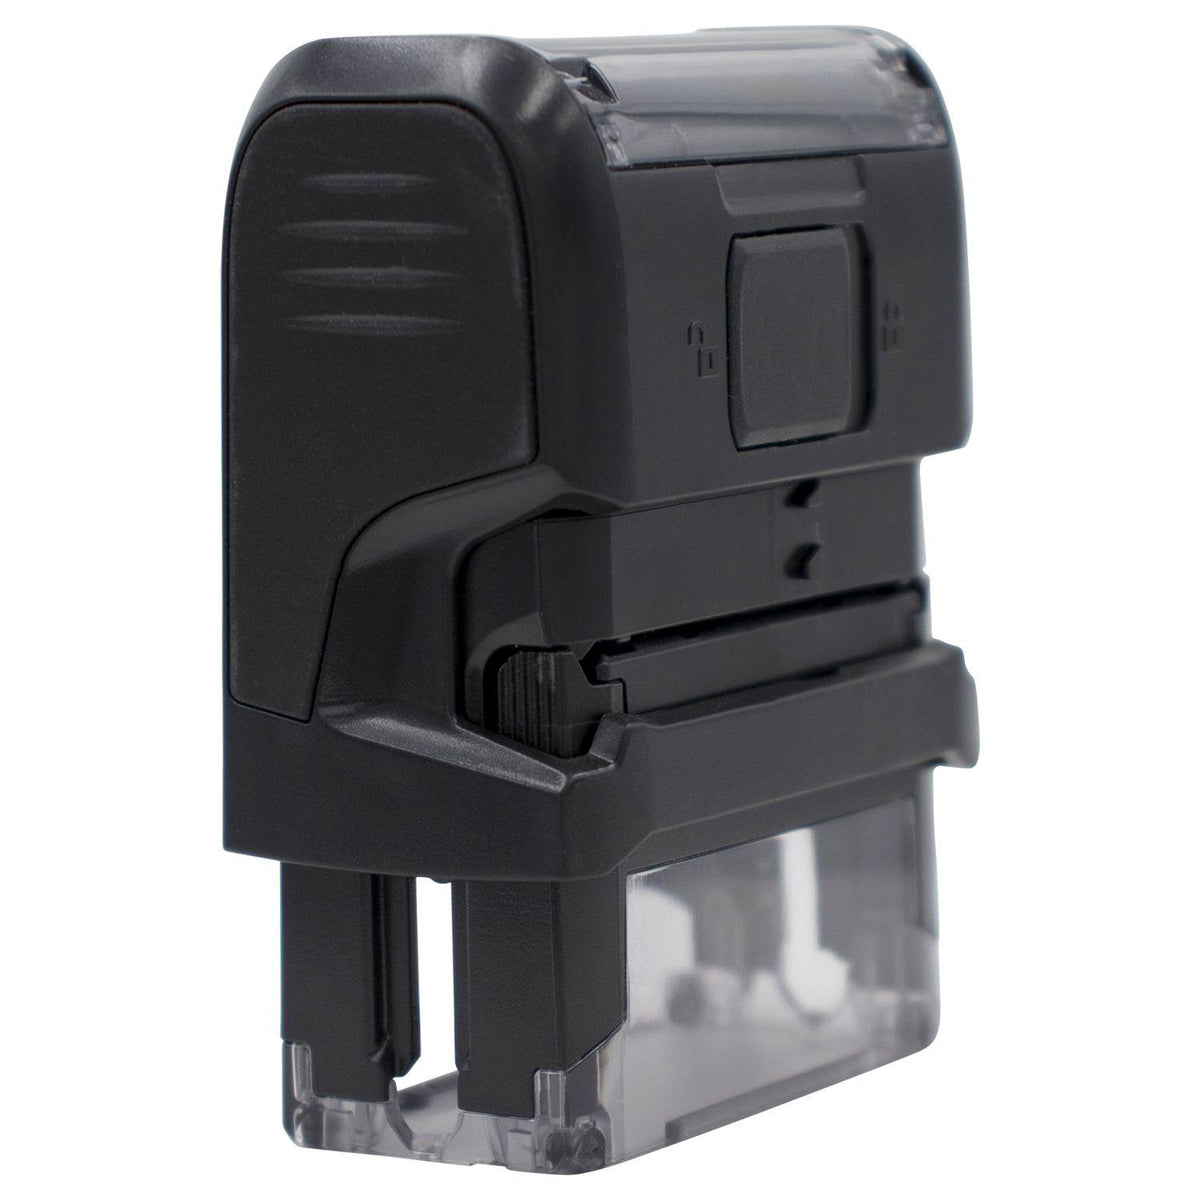 Large Self-Inking Outline Anulado Stamp - Engineer Seal Stamps - Brand_Trodat, Impression Size_Large, Stamp Type_Self-Inking Stamp, Type of Use_Business, Type of Use_Finance, Type of Use_Office, Type of Use_Professional